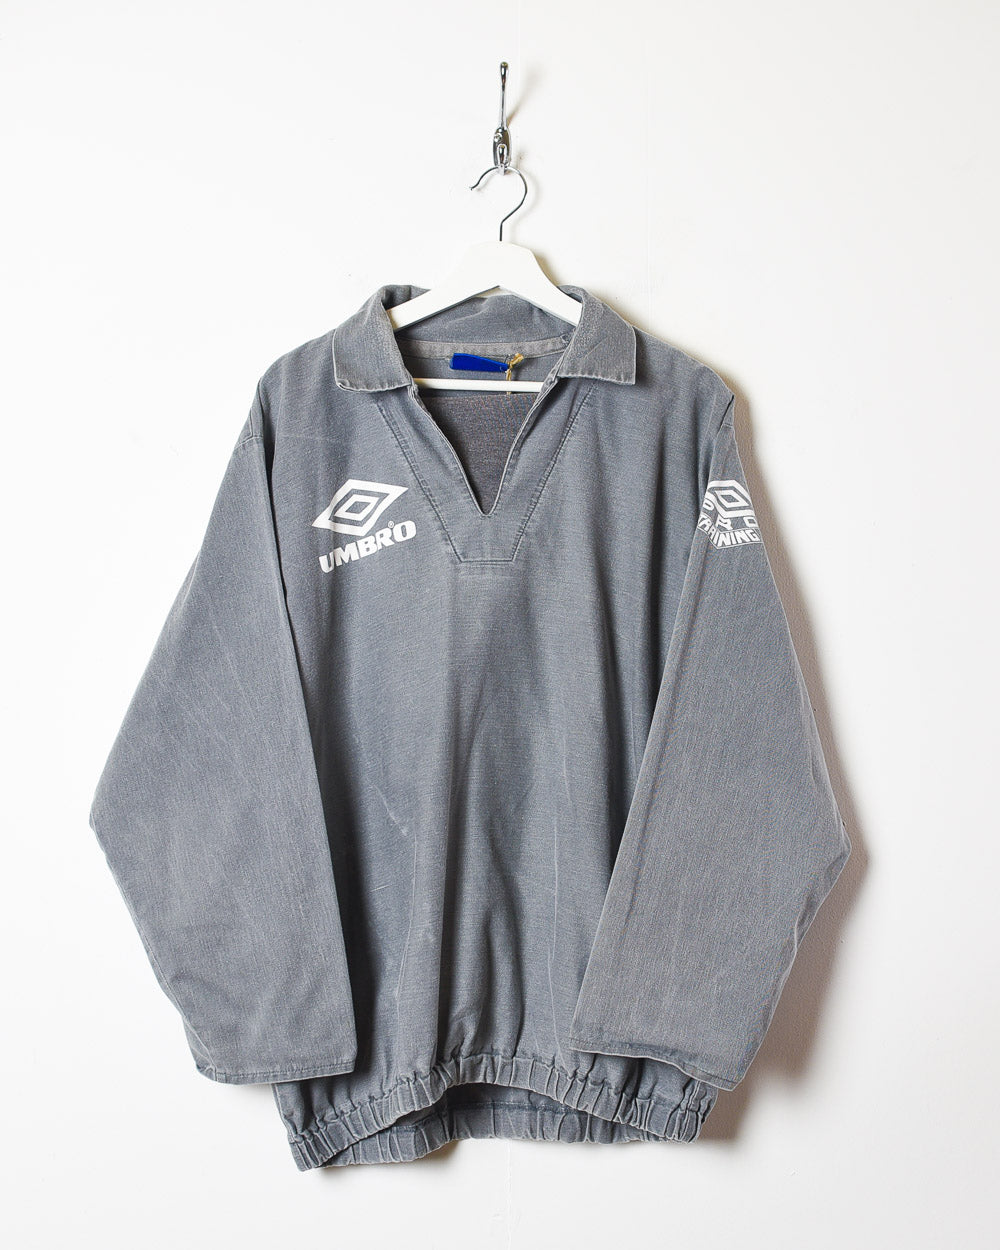 Vintage 90s Grey Umbro Pullover Drill Jacket - Large Cotton 